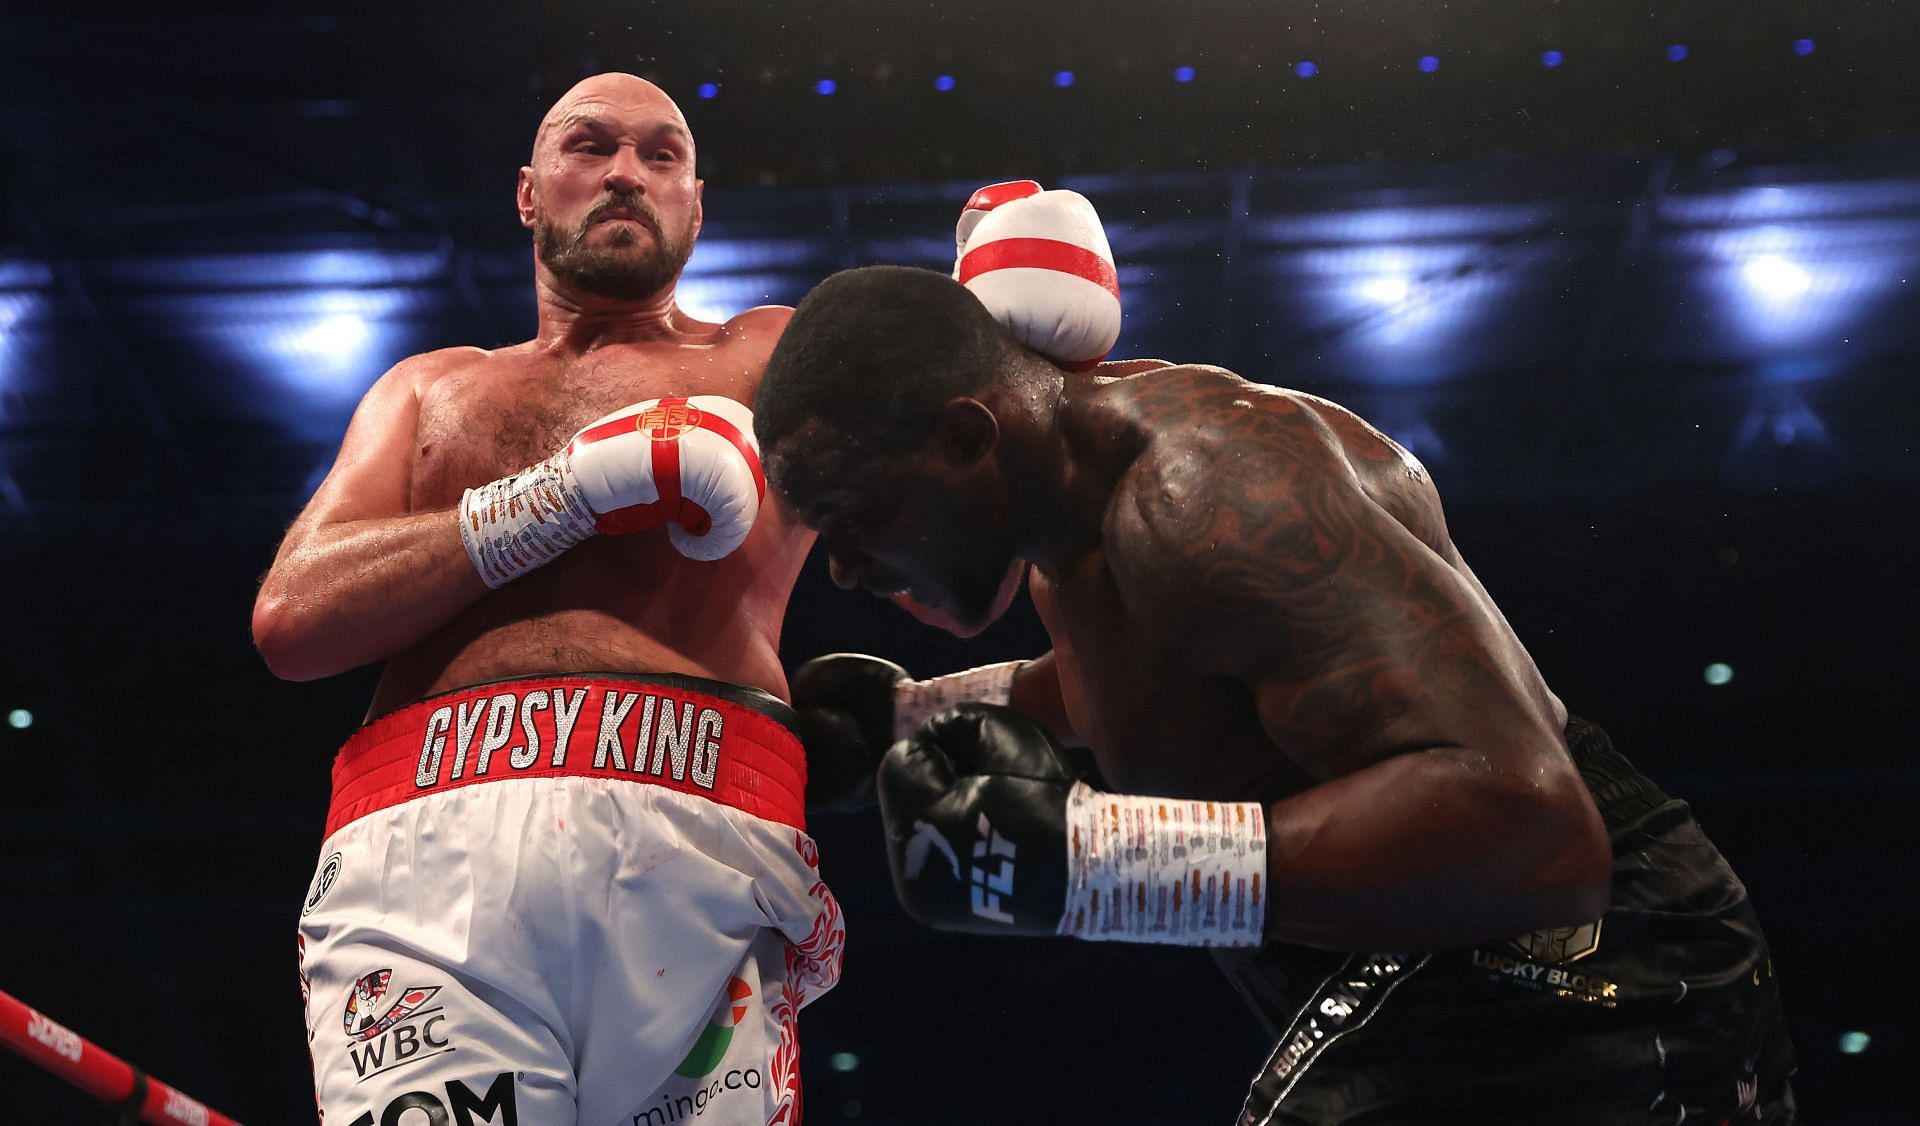 Tyson Fury (left) v Dillian Whyte (right) - Getty Images